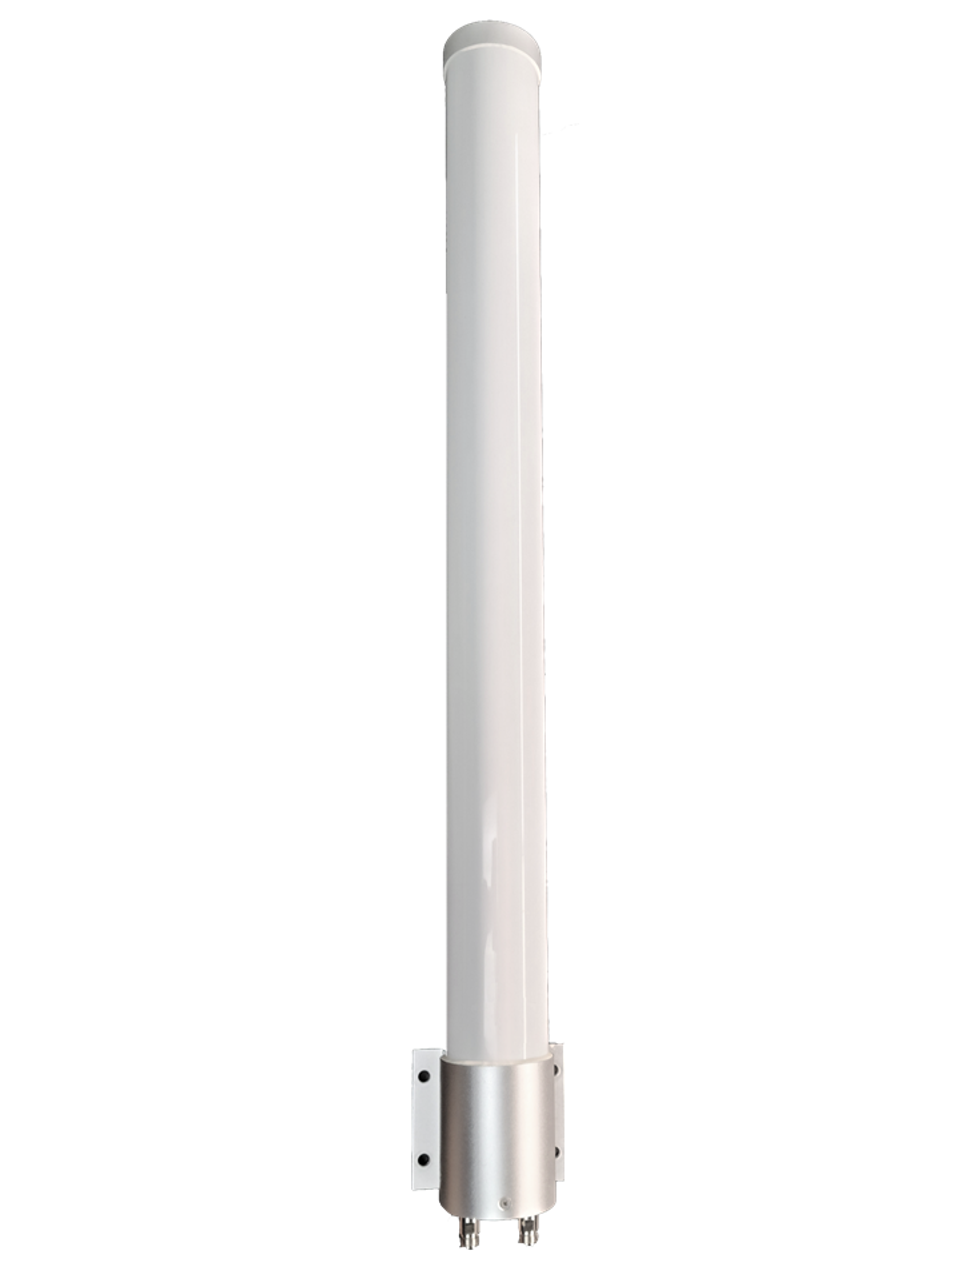 M39 Omni Directional MIMO 2 x Cellular 4G 5G LTE Antenna for Netgear LM1200 w/Bracket Mount - 2 x N Female w/Cable Length Options.